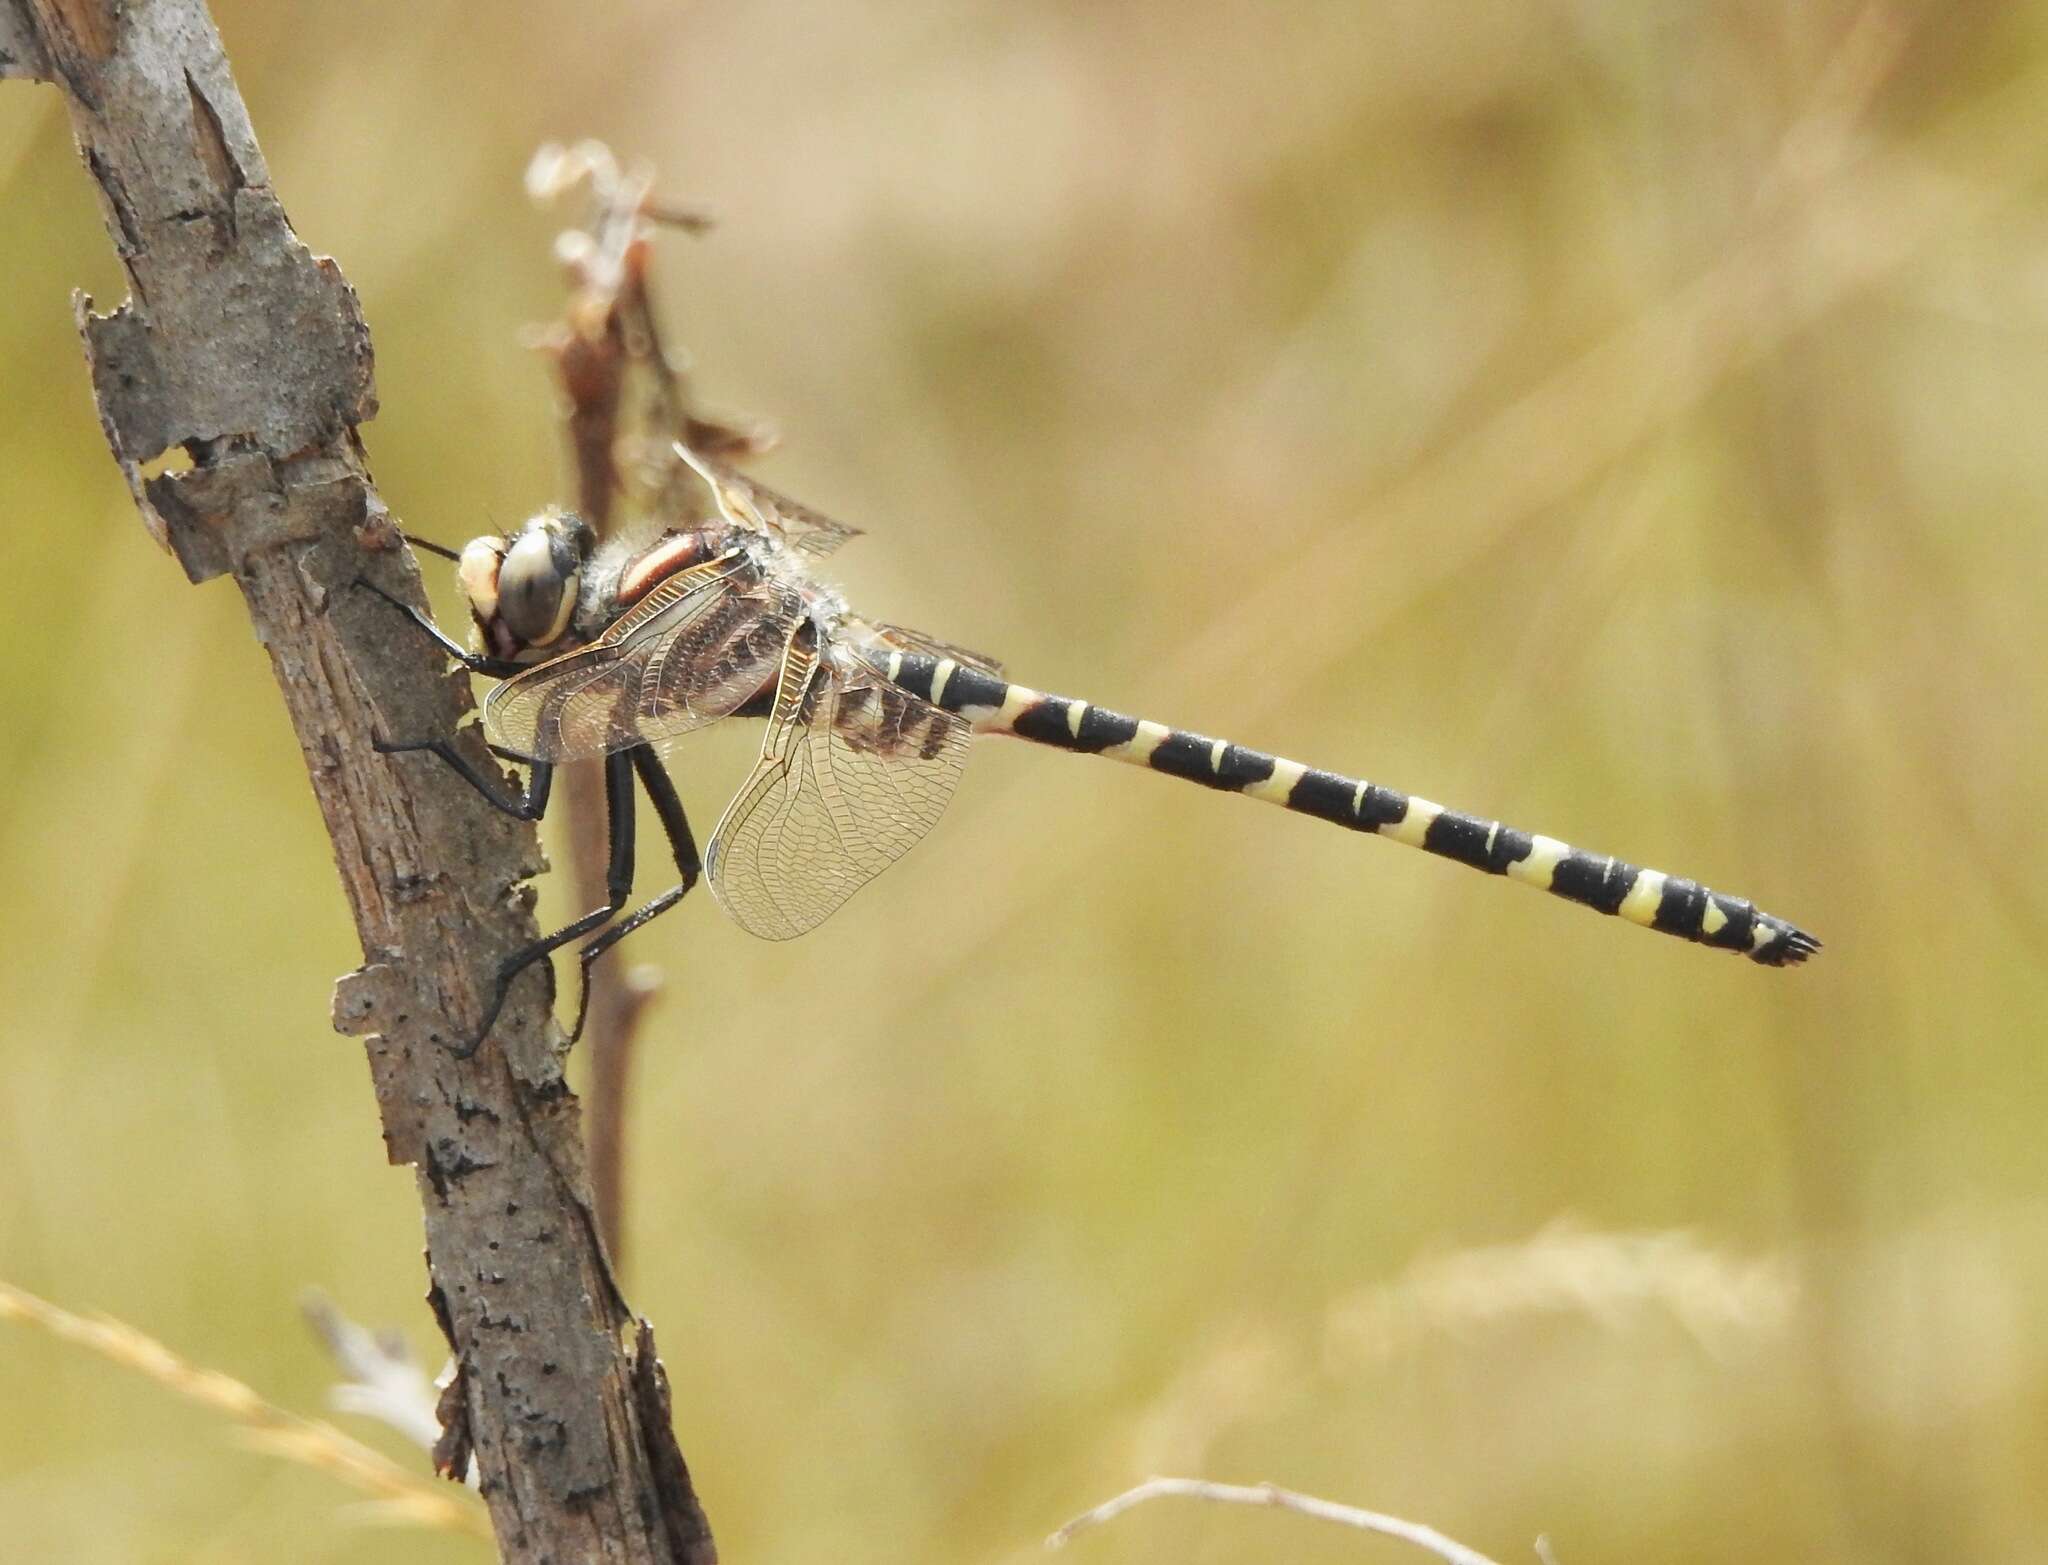 Image of Say's Spiketail